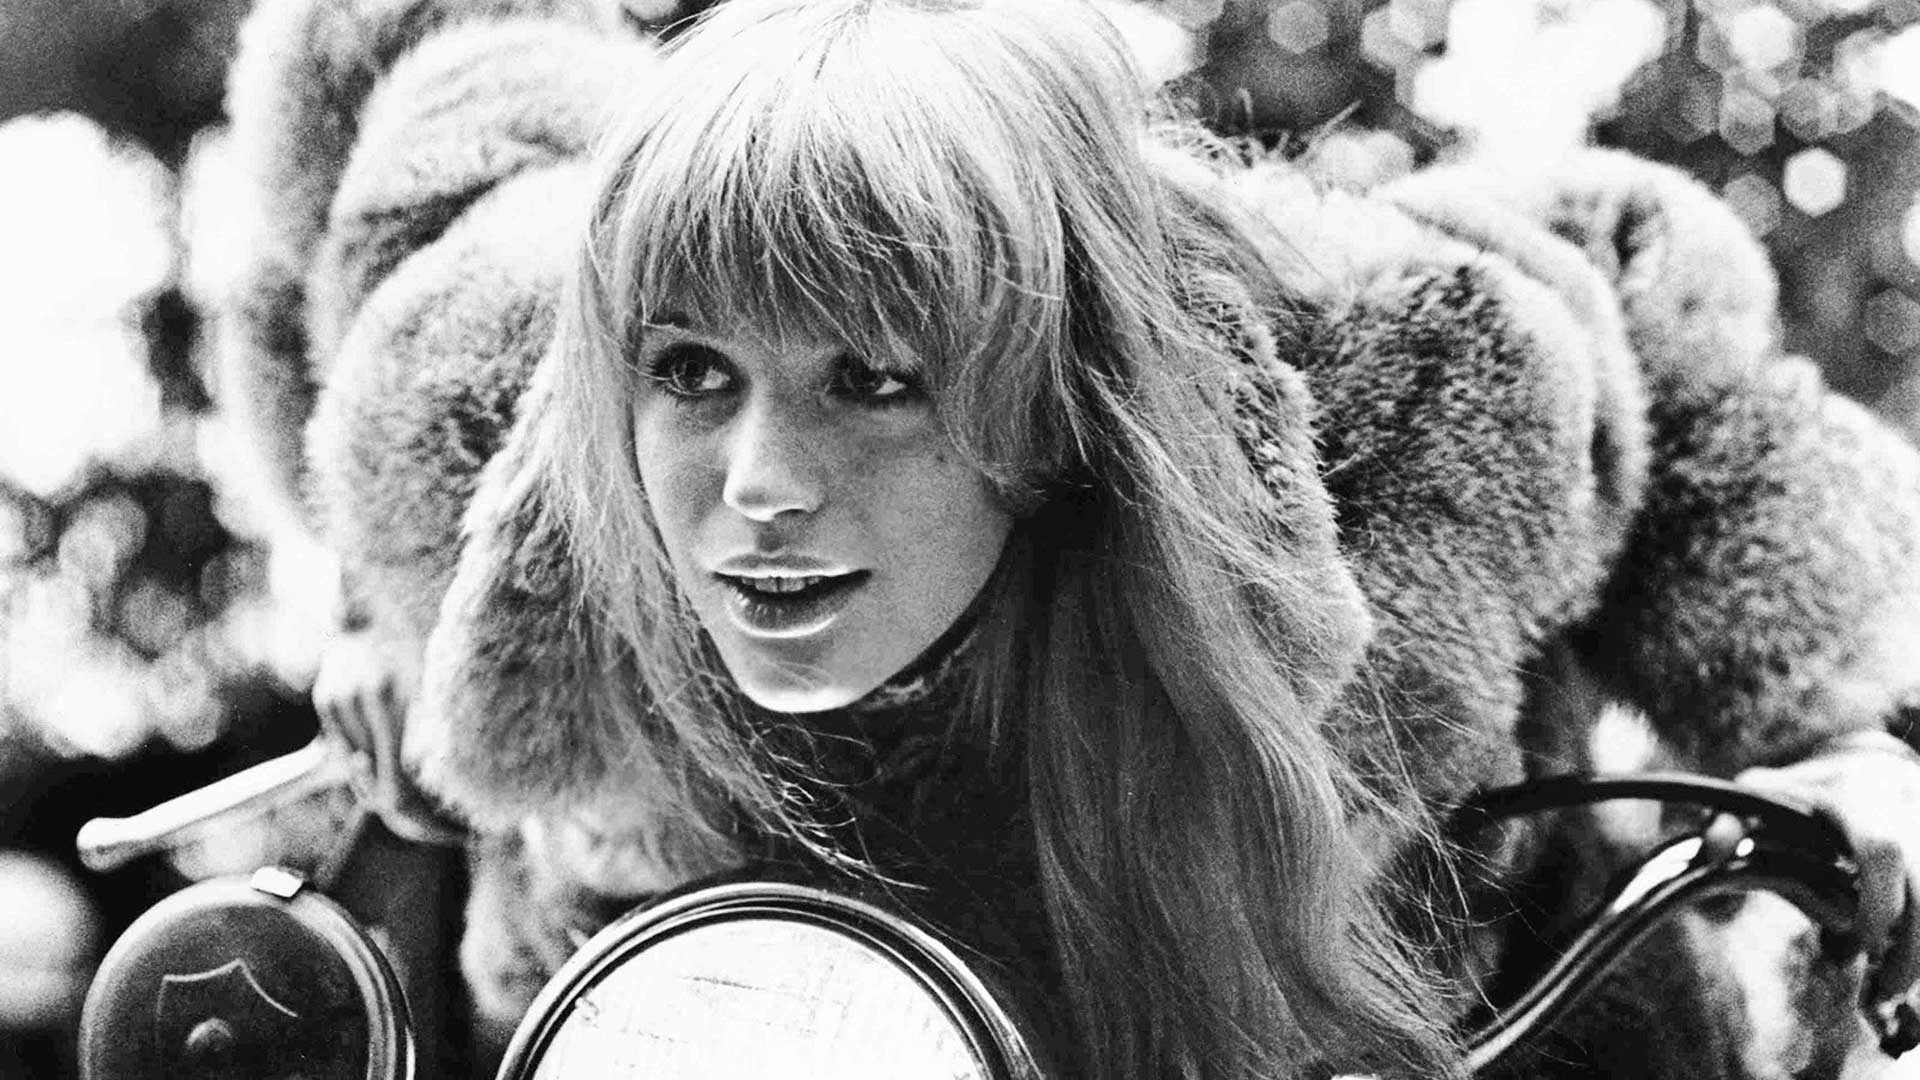 Young Marianne Faithfull in a fur coat